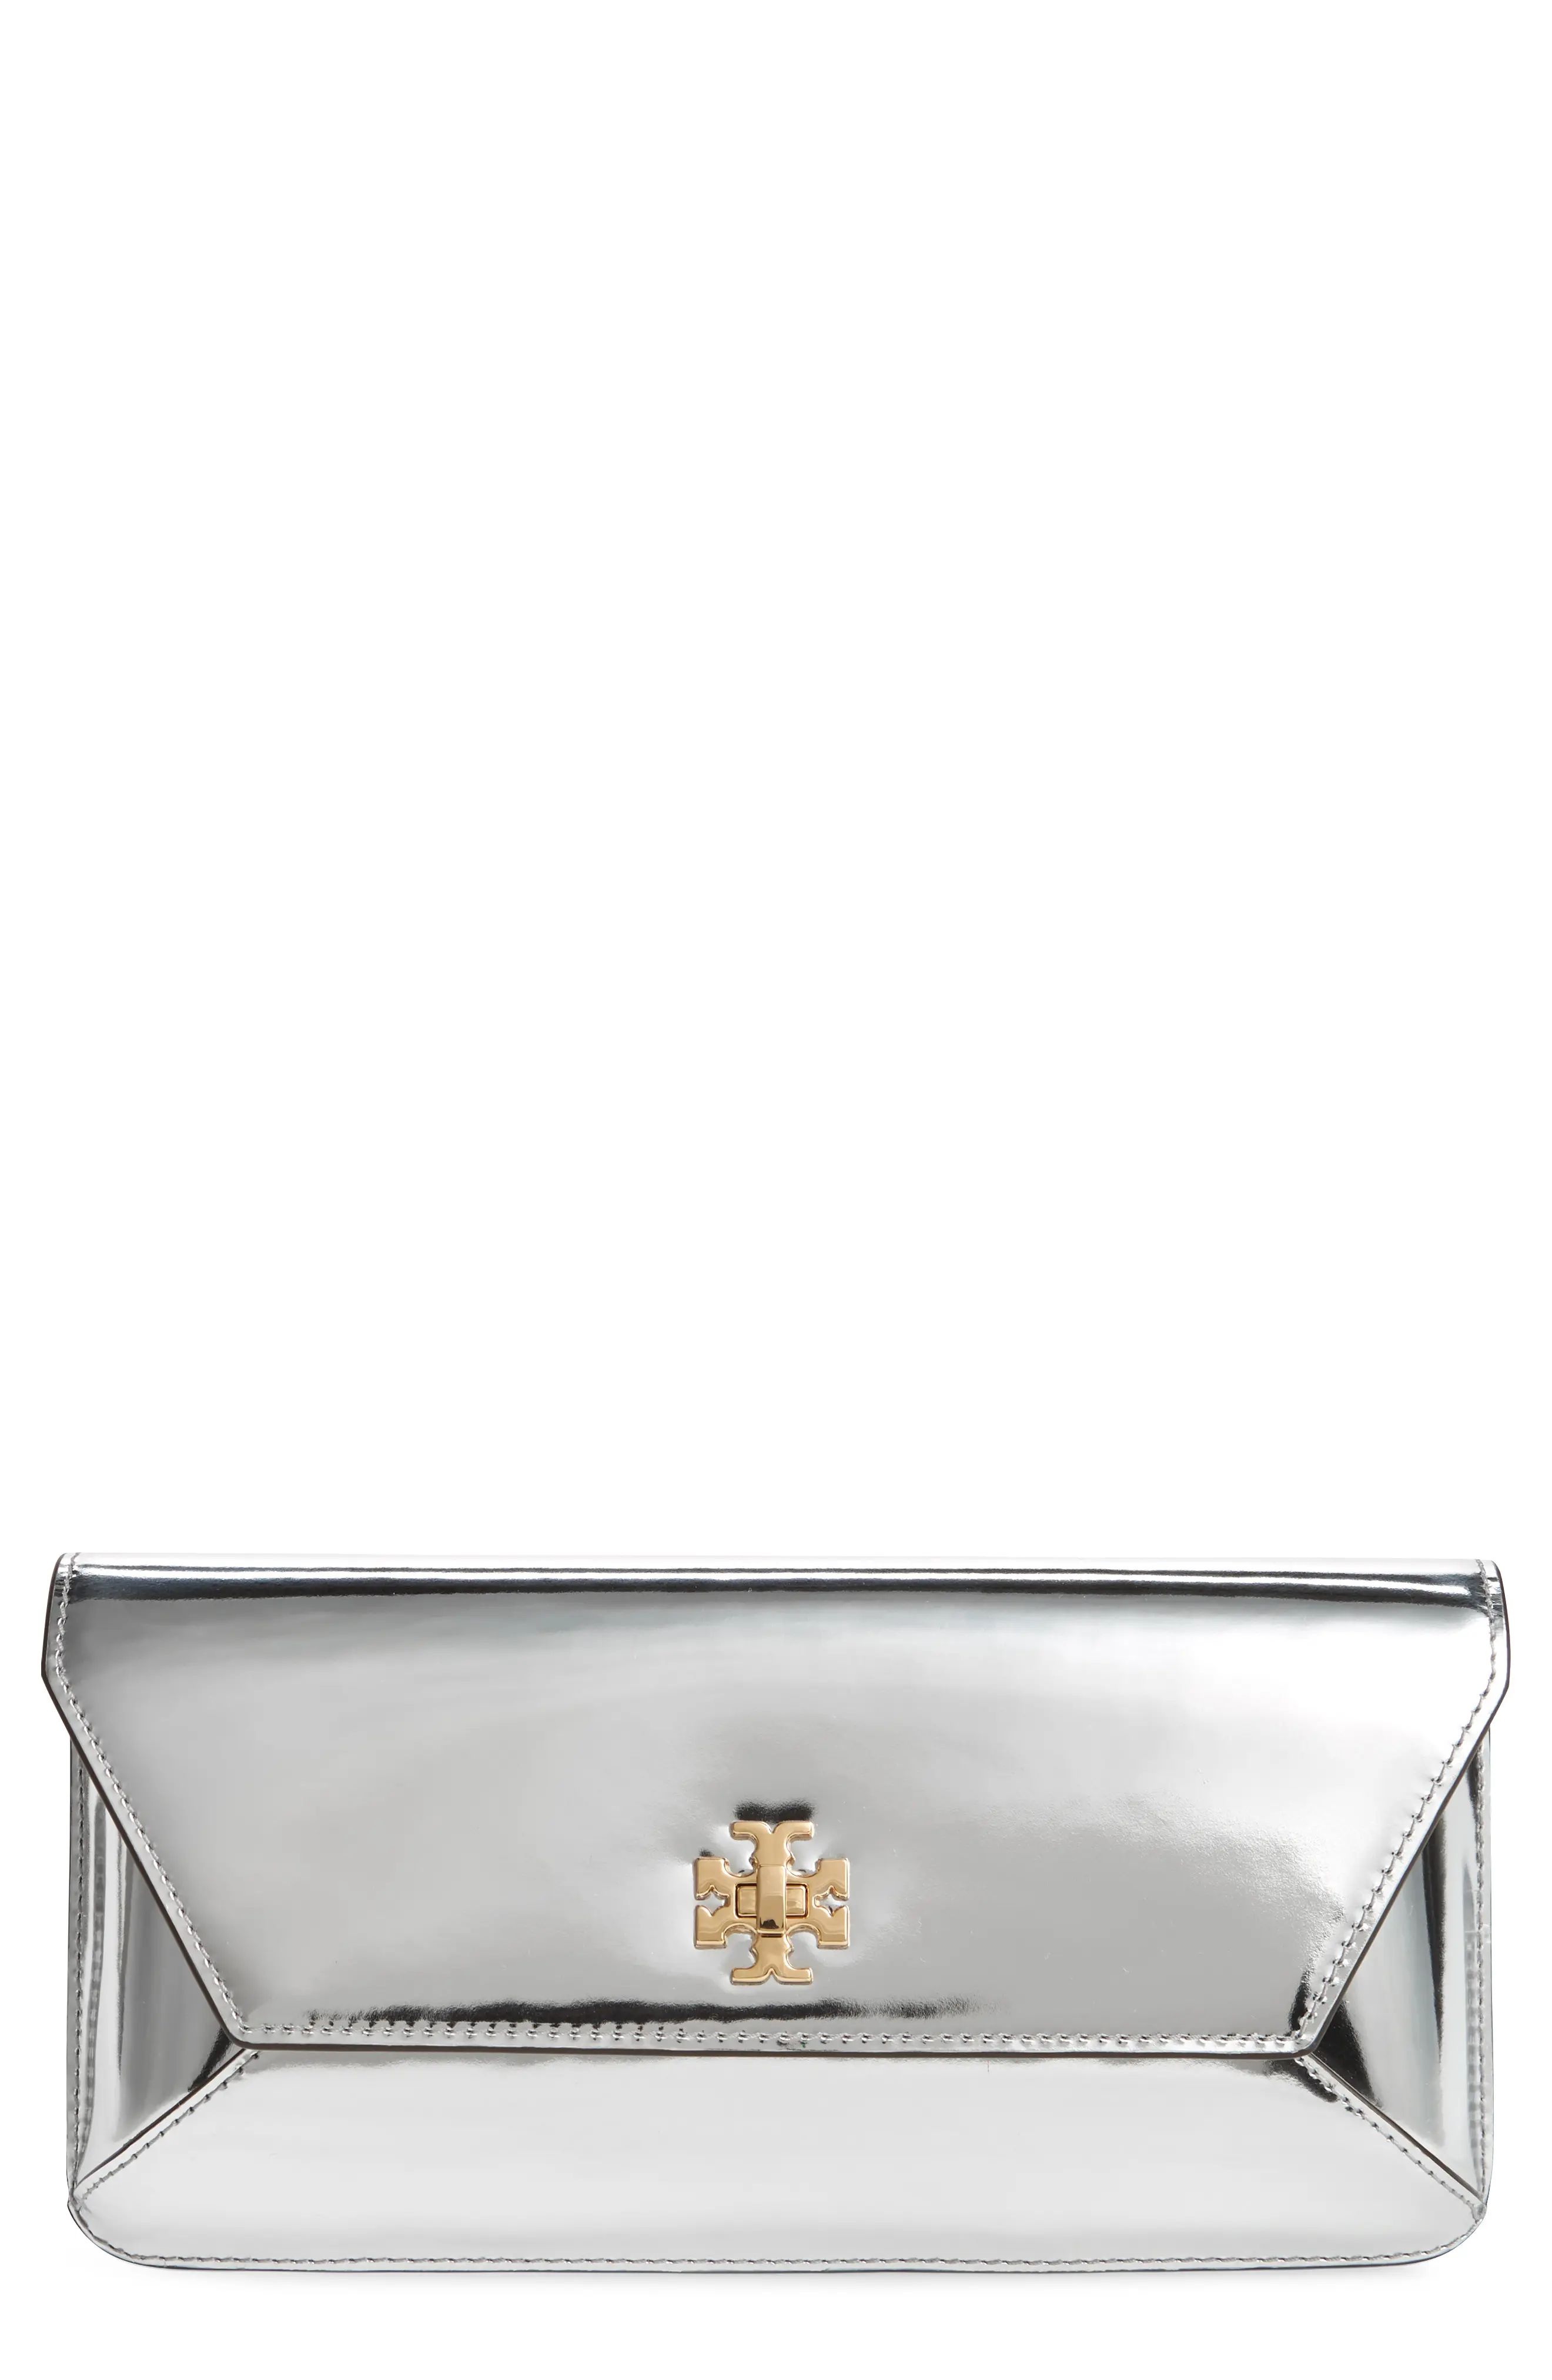 Tory Burch Kira Leather Envelope Clutch | Nordstrom